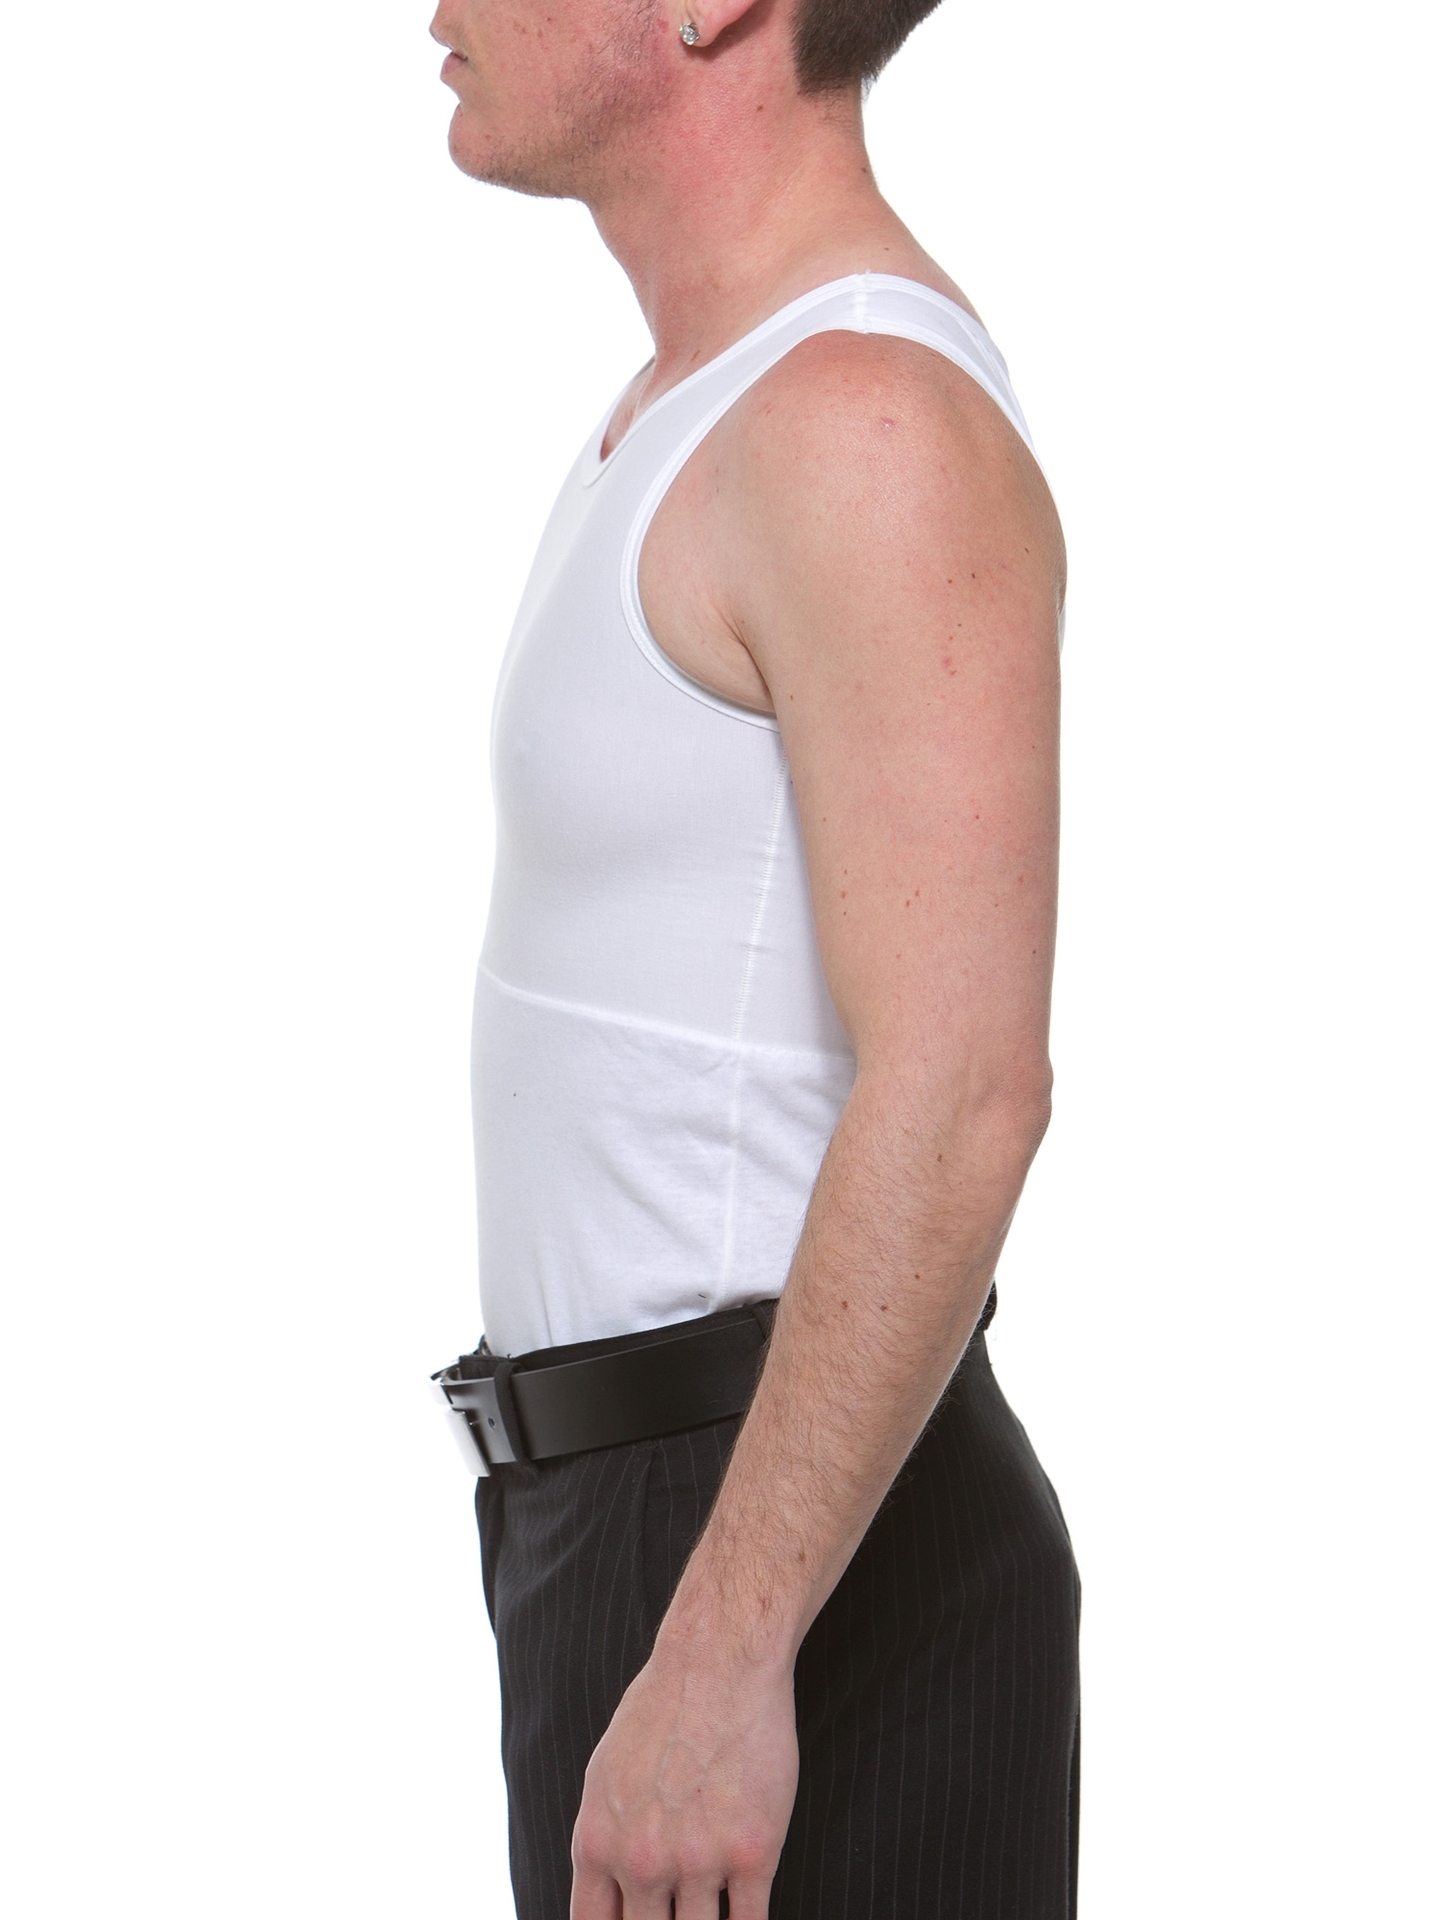 MagiCotton Extreme Chest Binder Tank. FTM Chest Binders for Trans